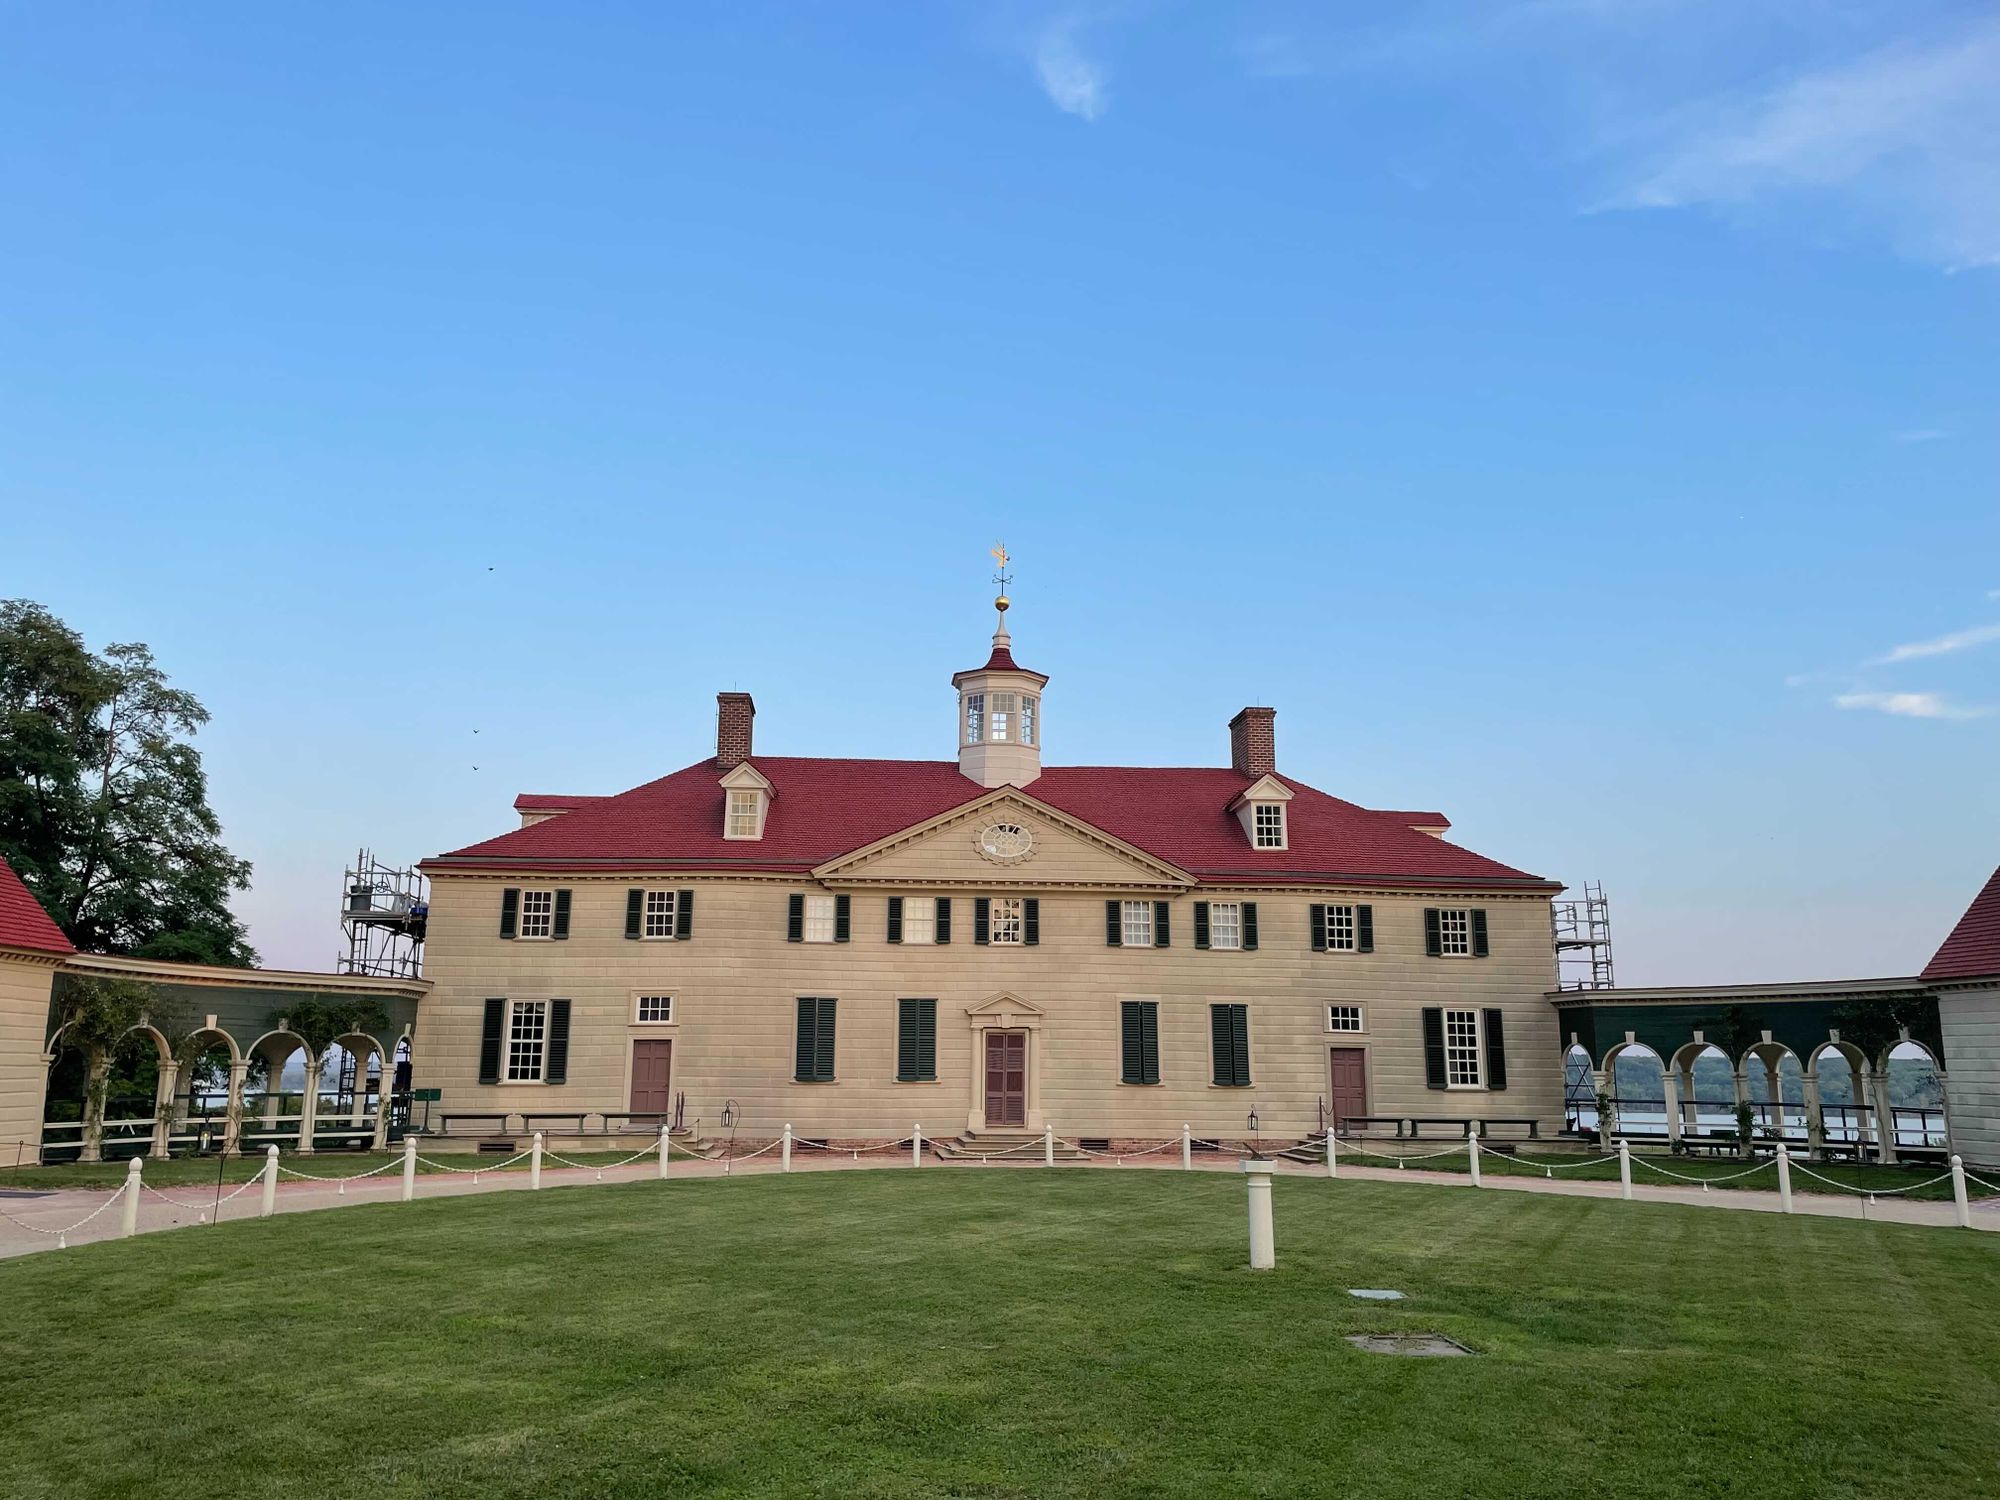 Opinion: What to the slave is George Washington's Mount Vernon?